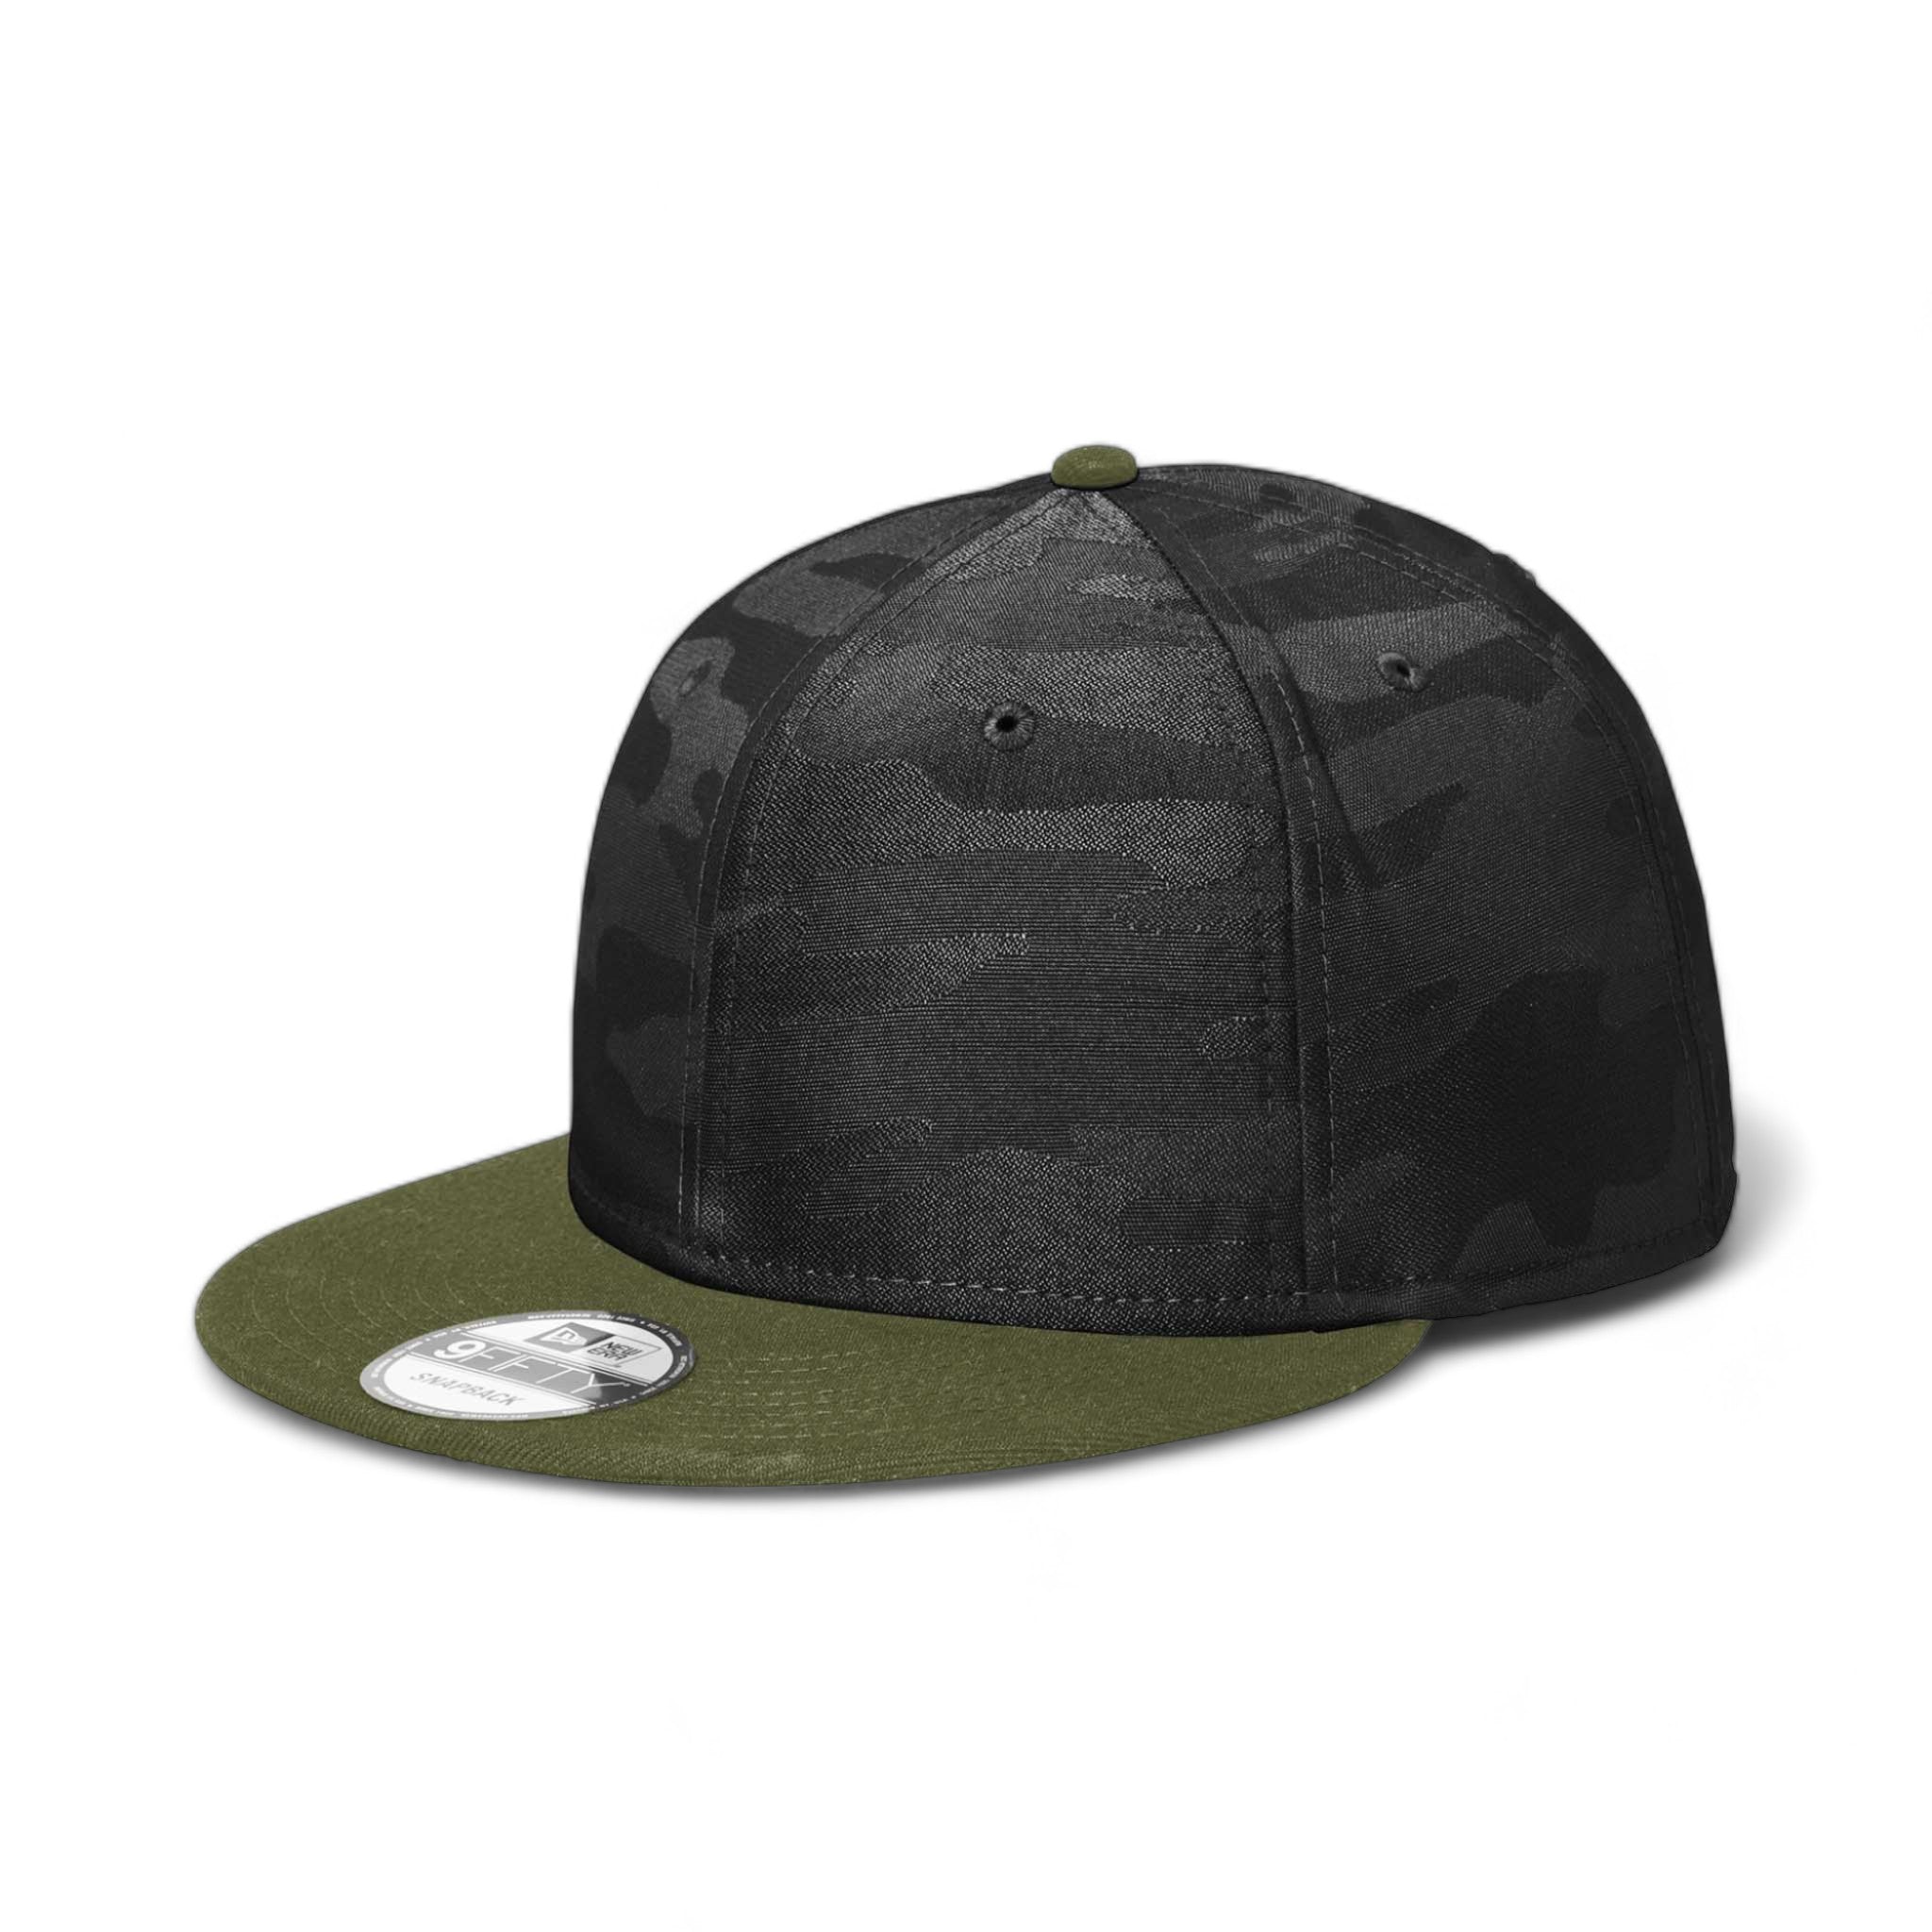 Side view of New Era NE407 custom hat in army and black camo